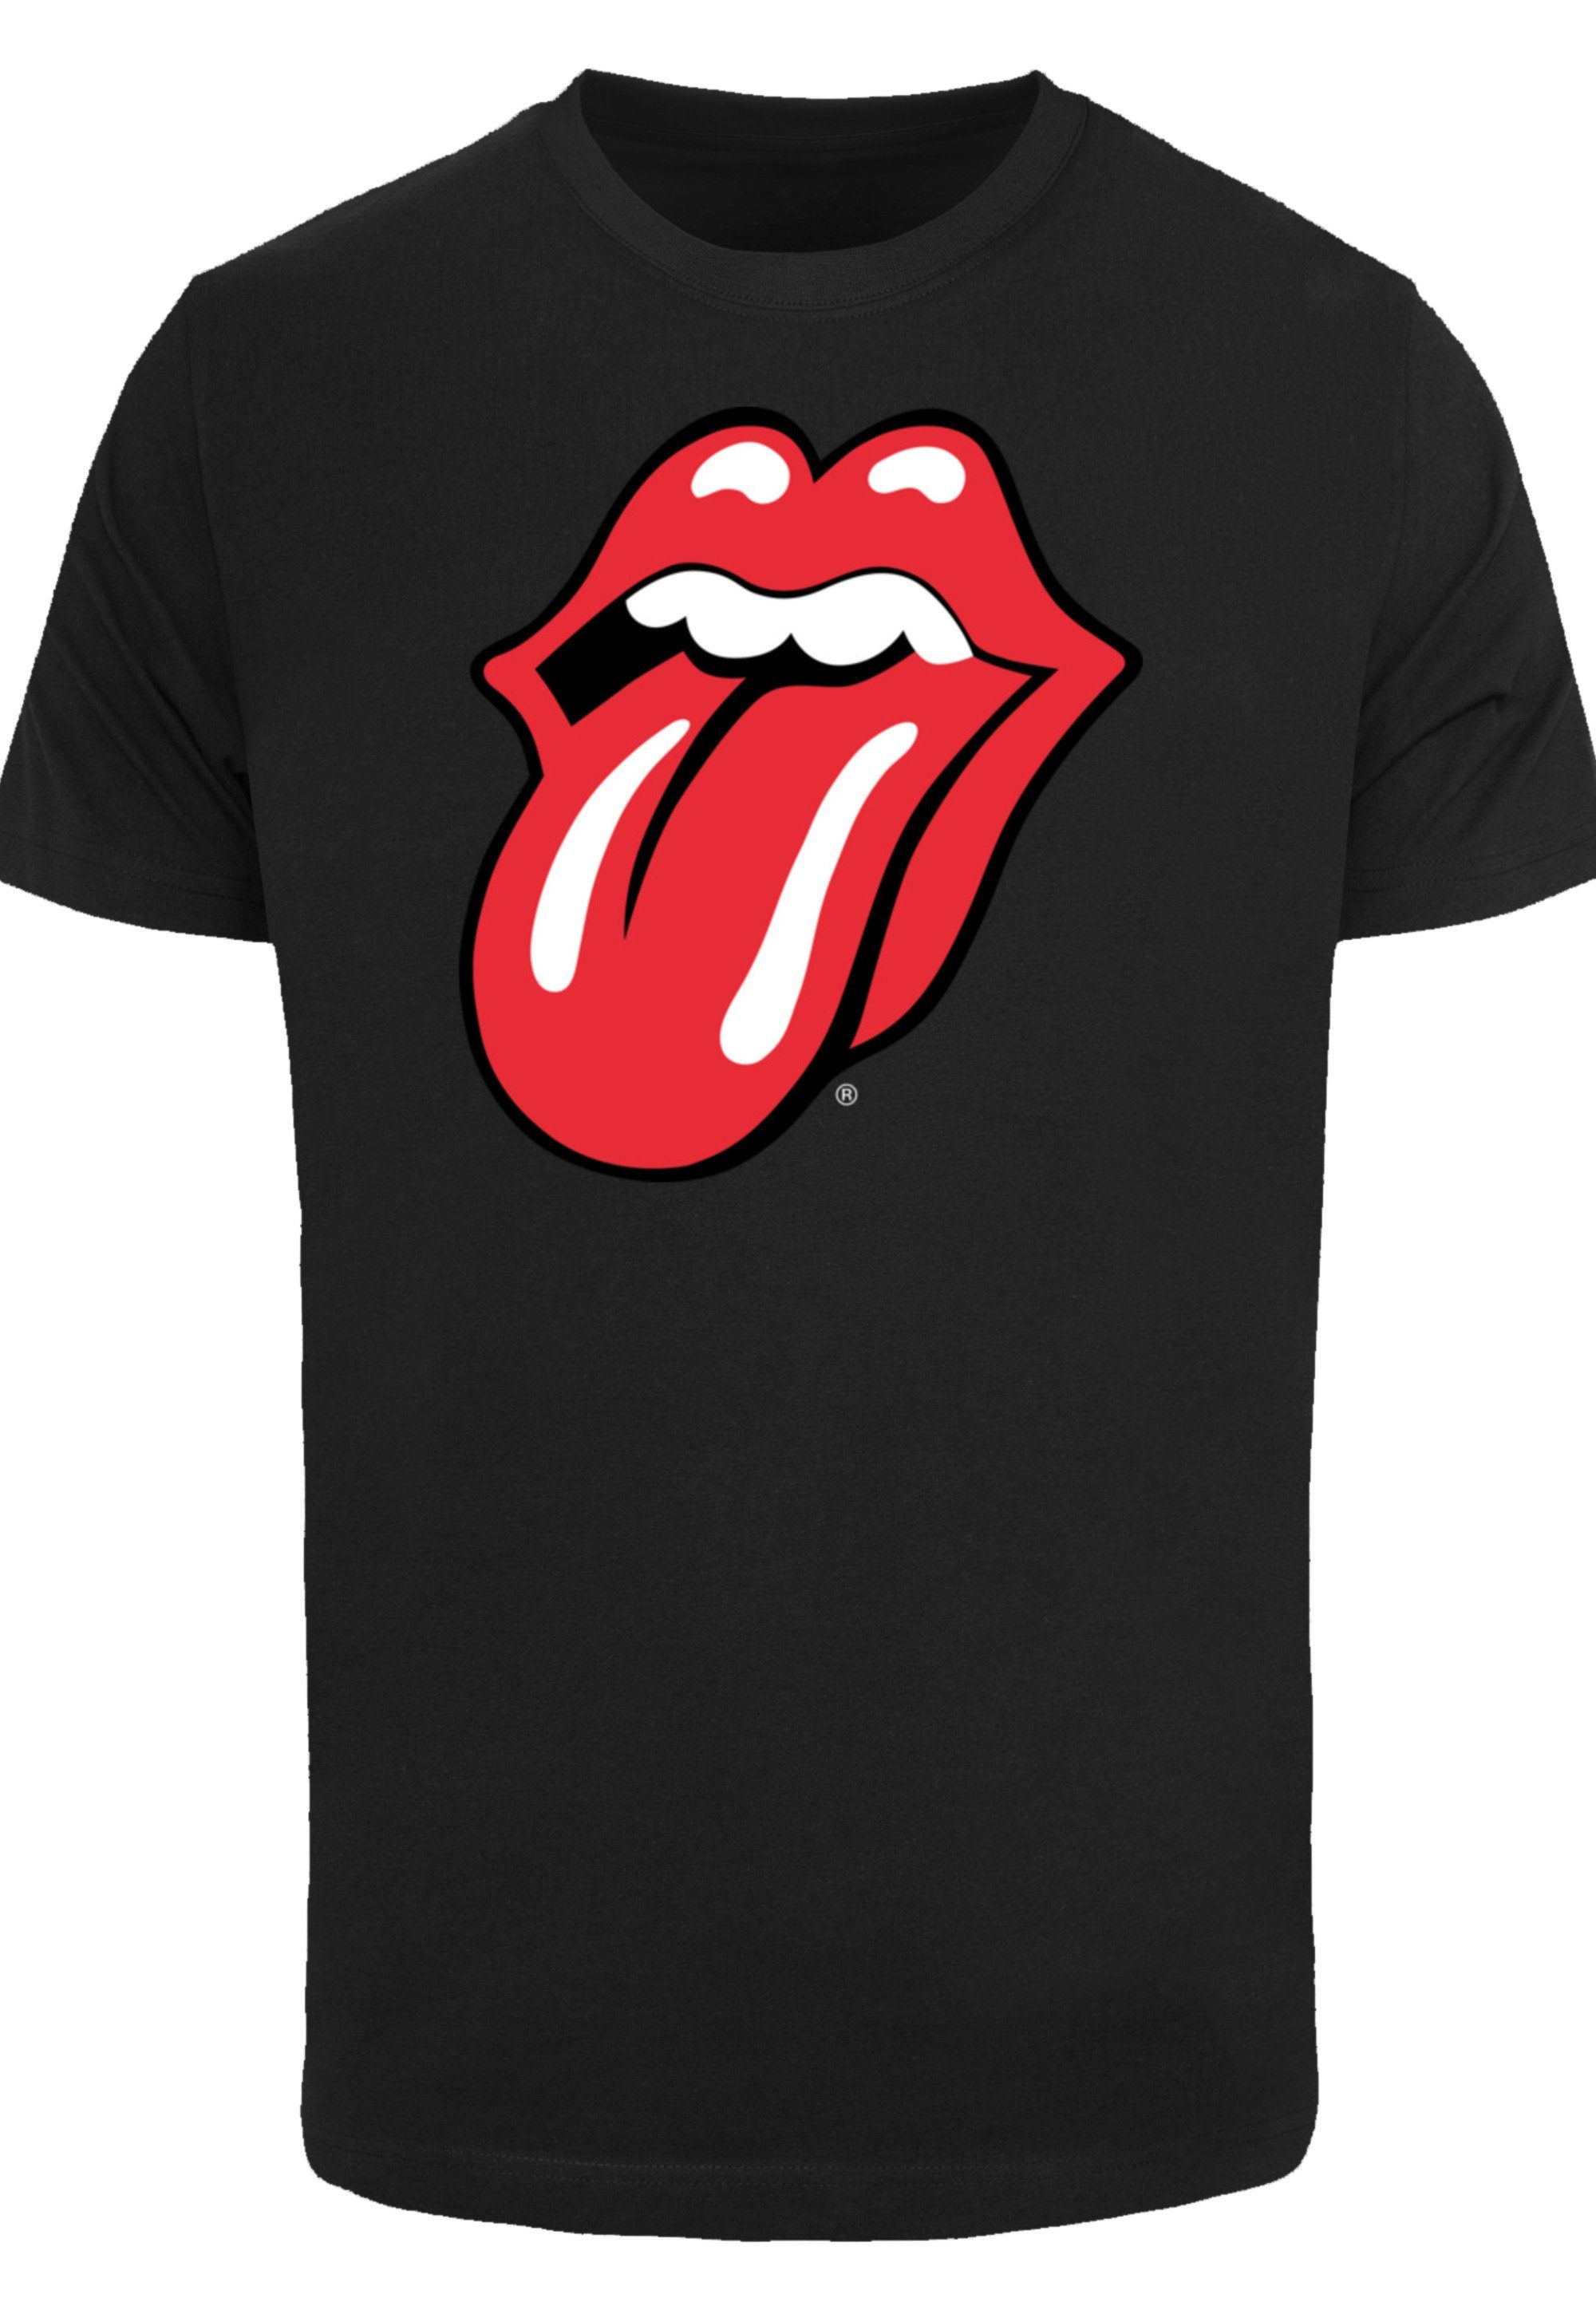 F4NT4STIC T-Shirt The Stones Print Zunge Rolling Rote schwarz